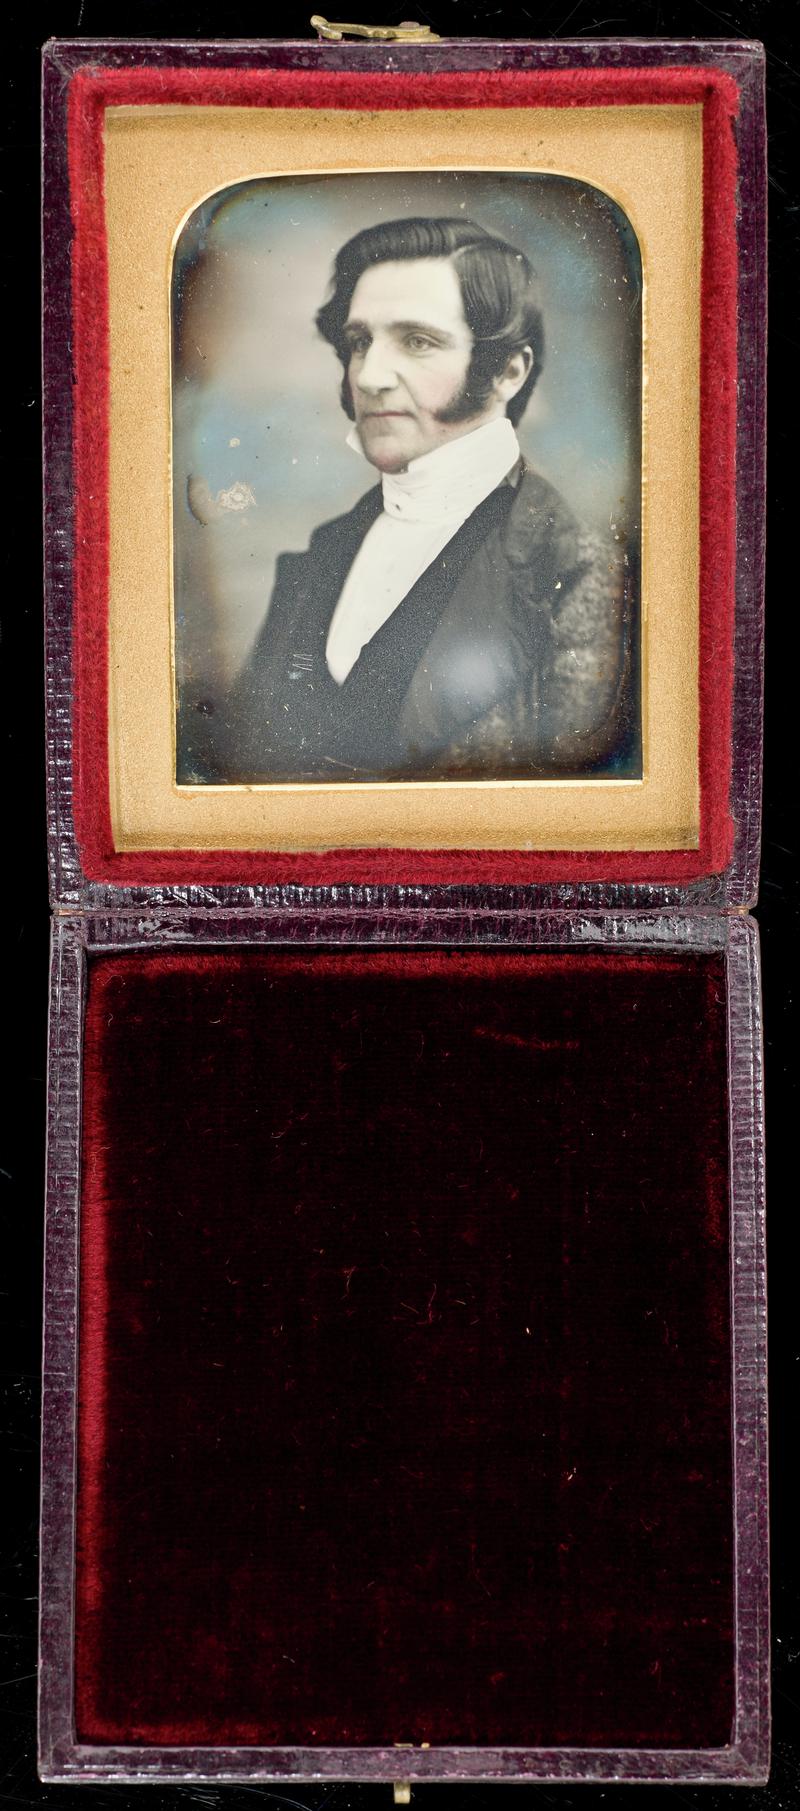 Case with portrait of a man